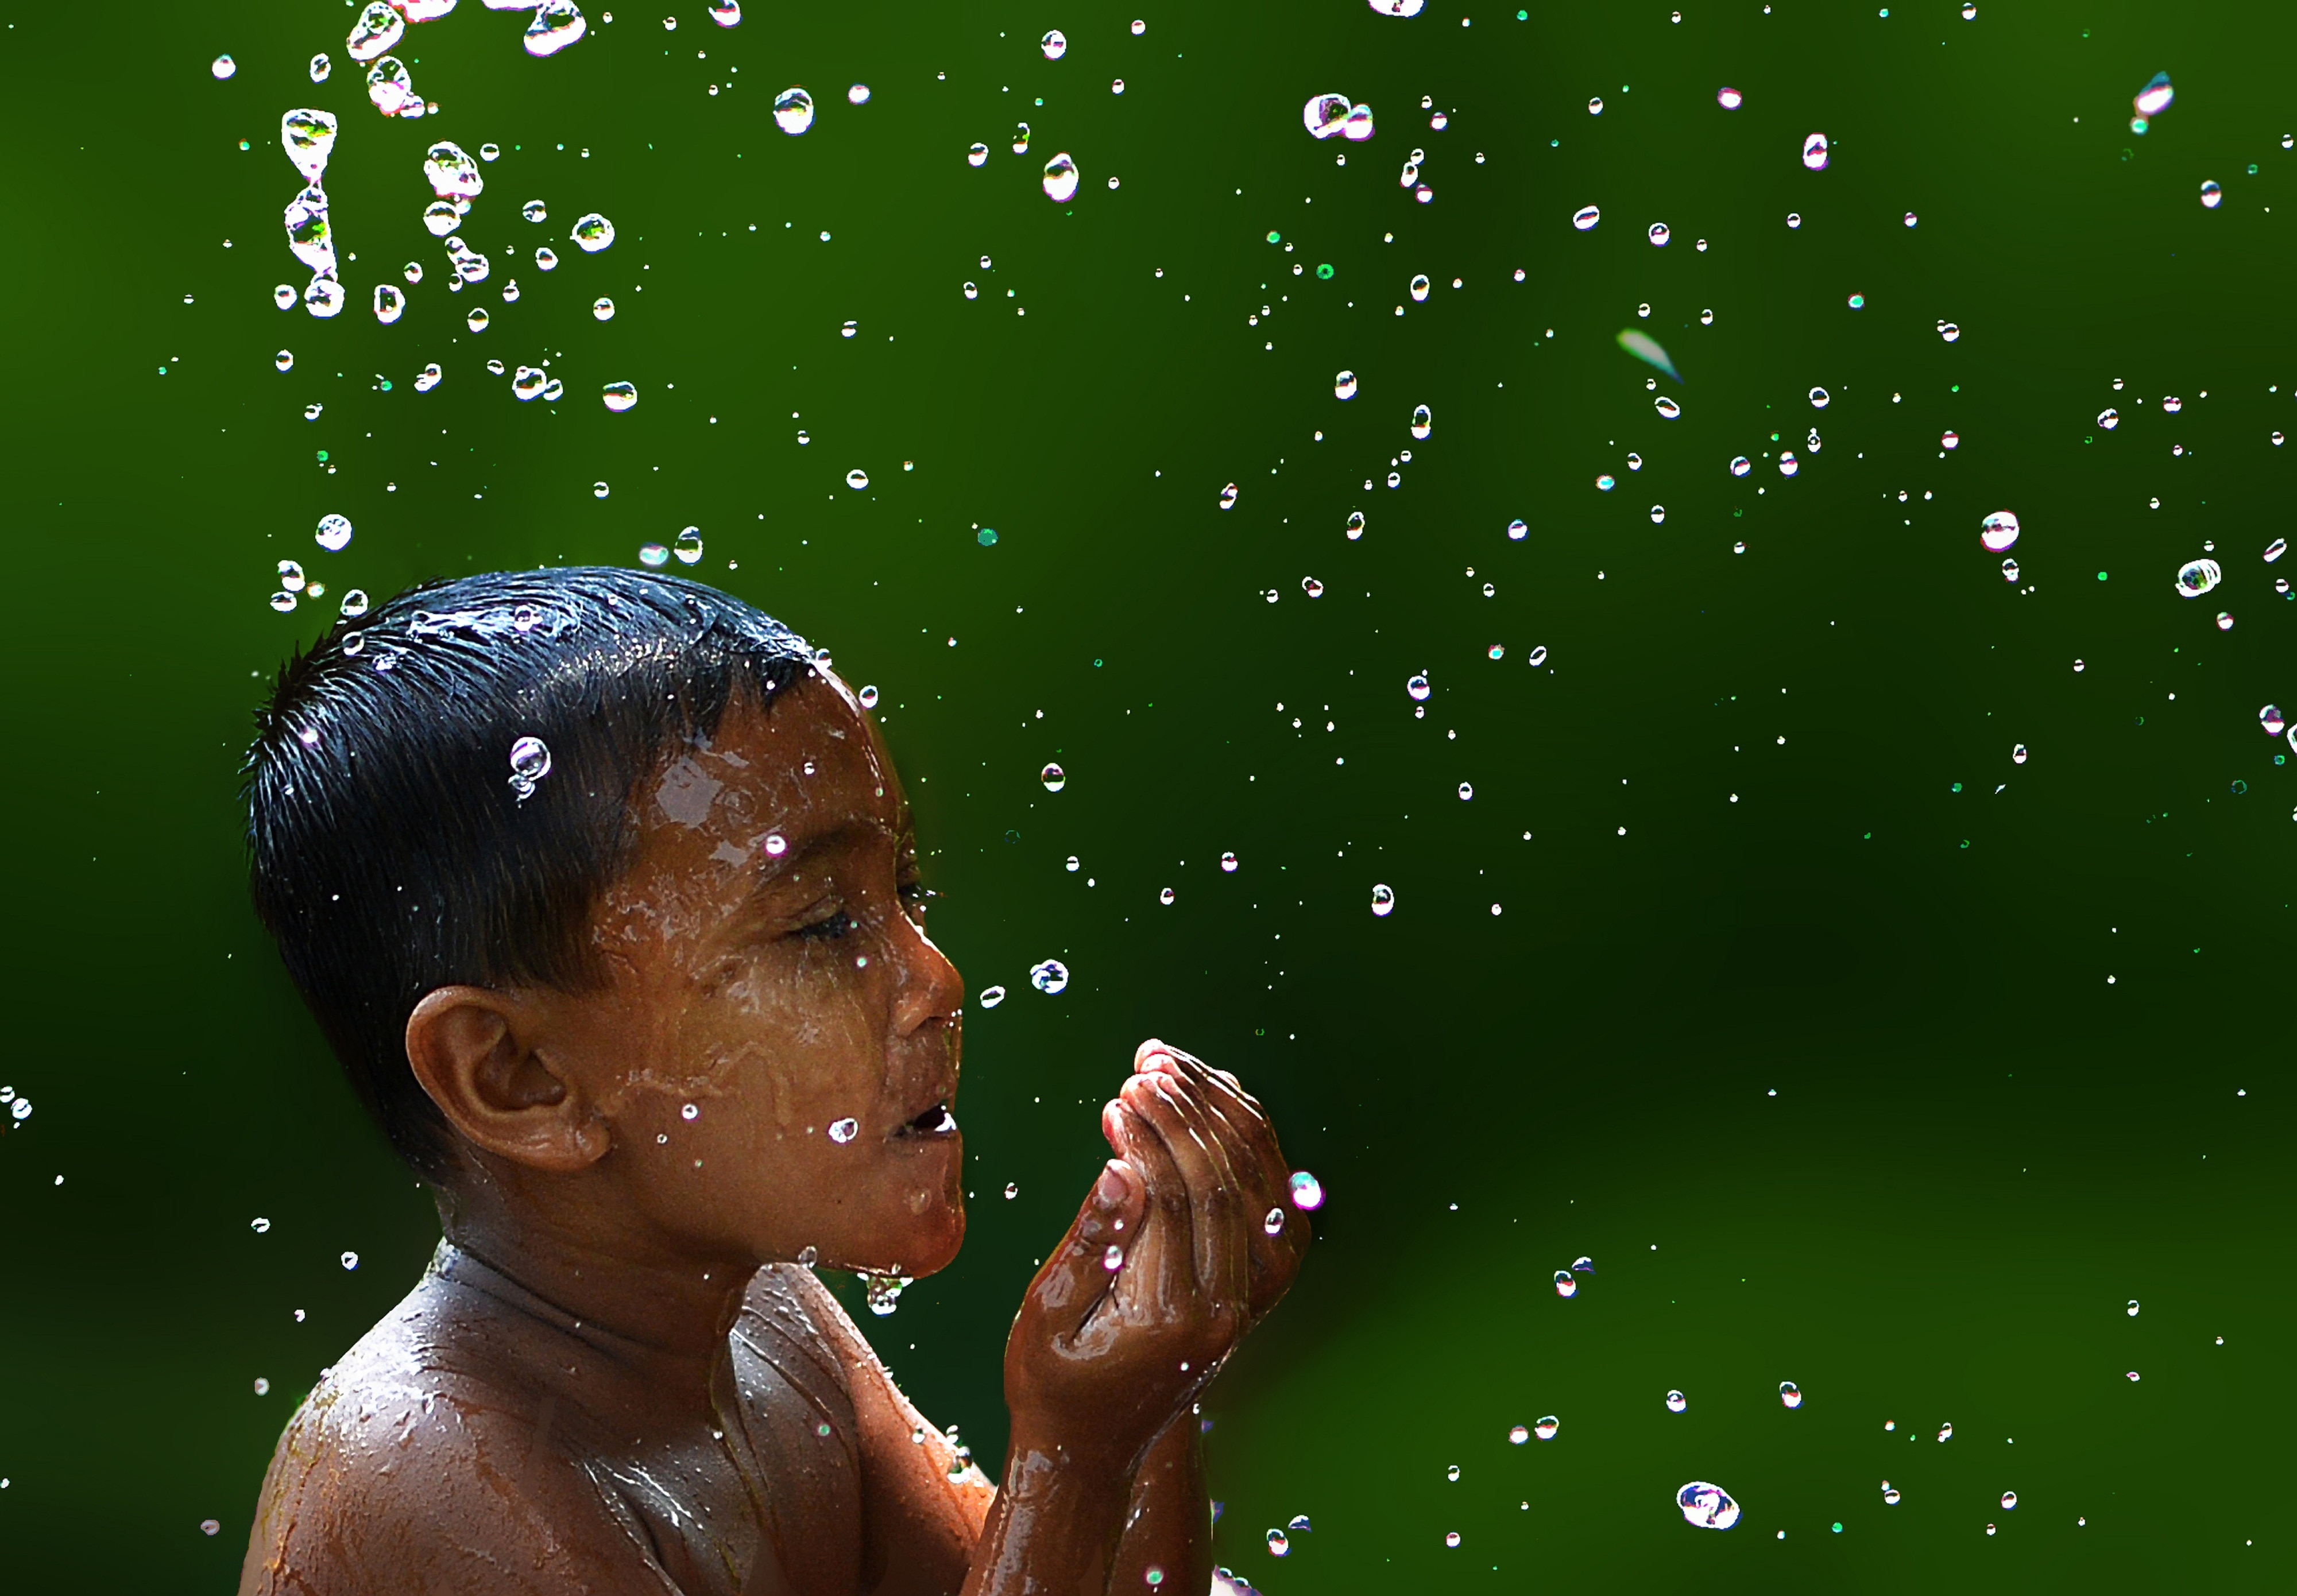 photo of boy with water droplets